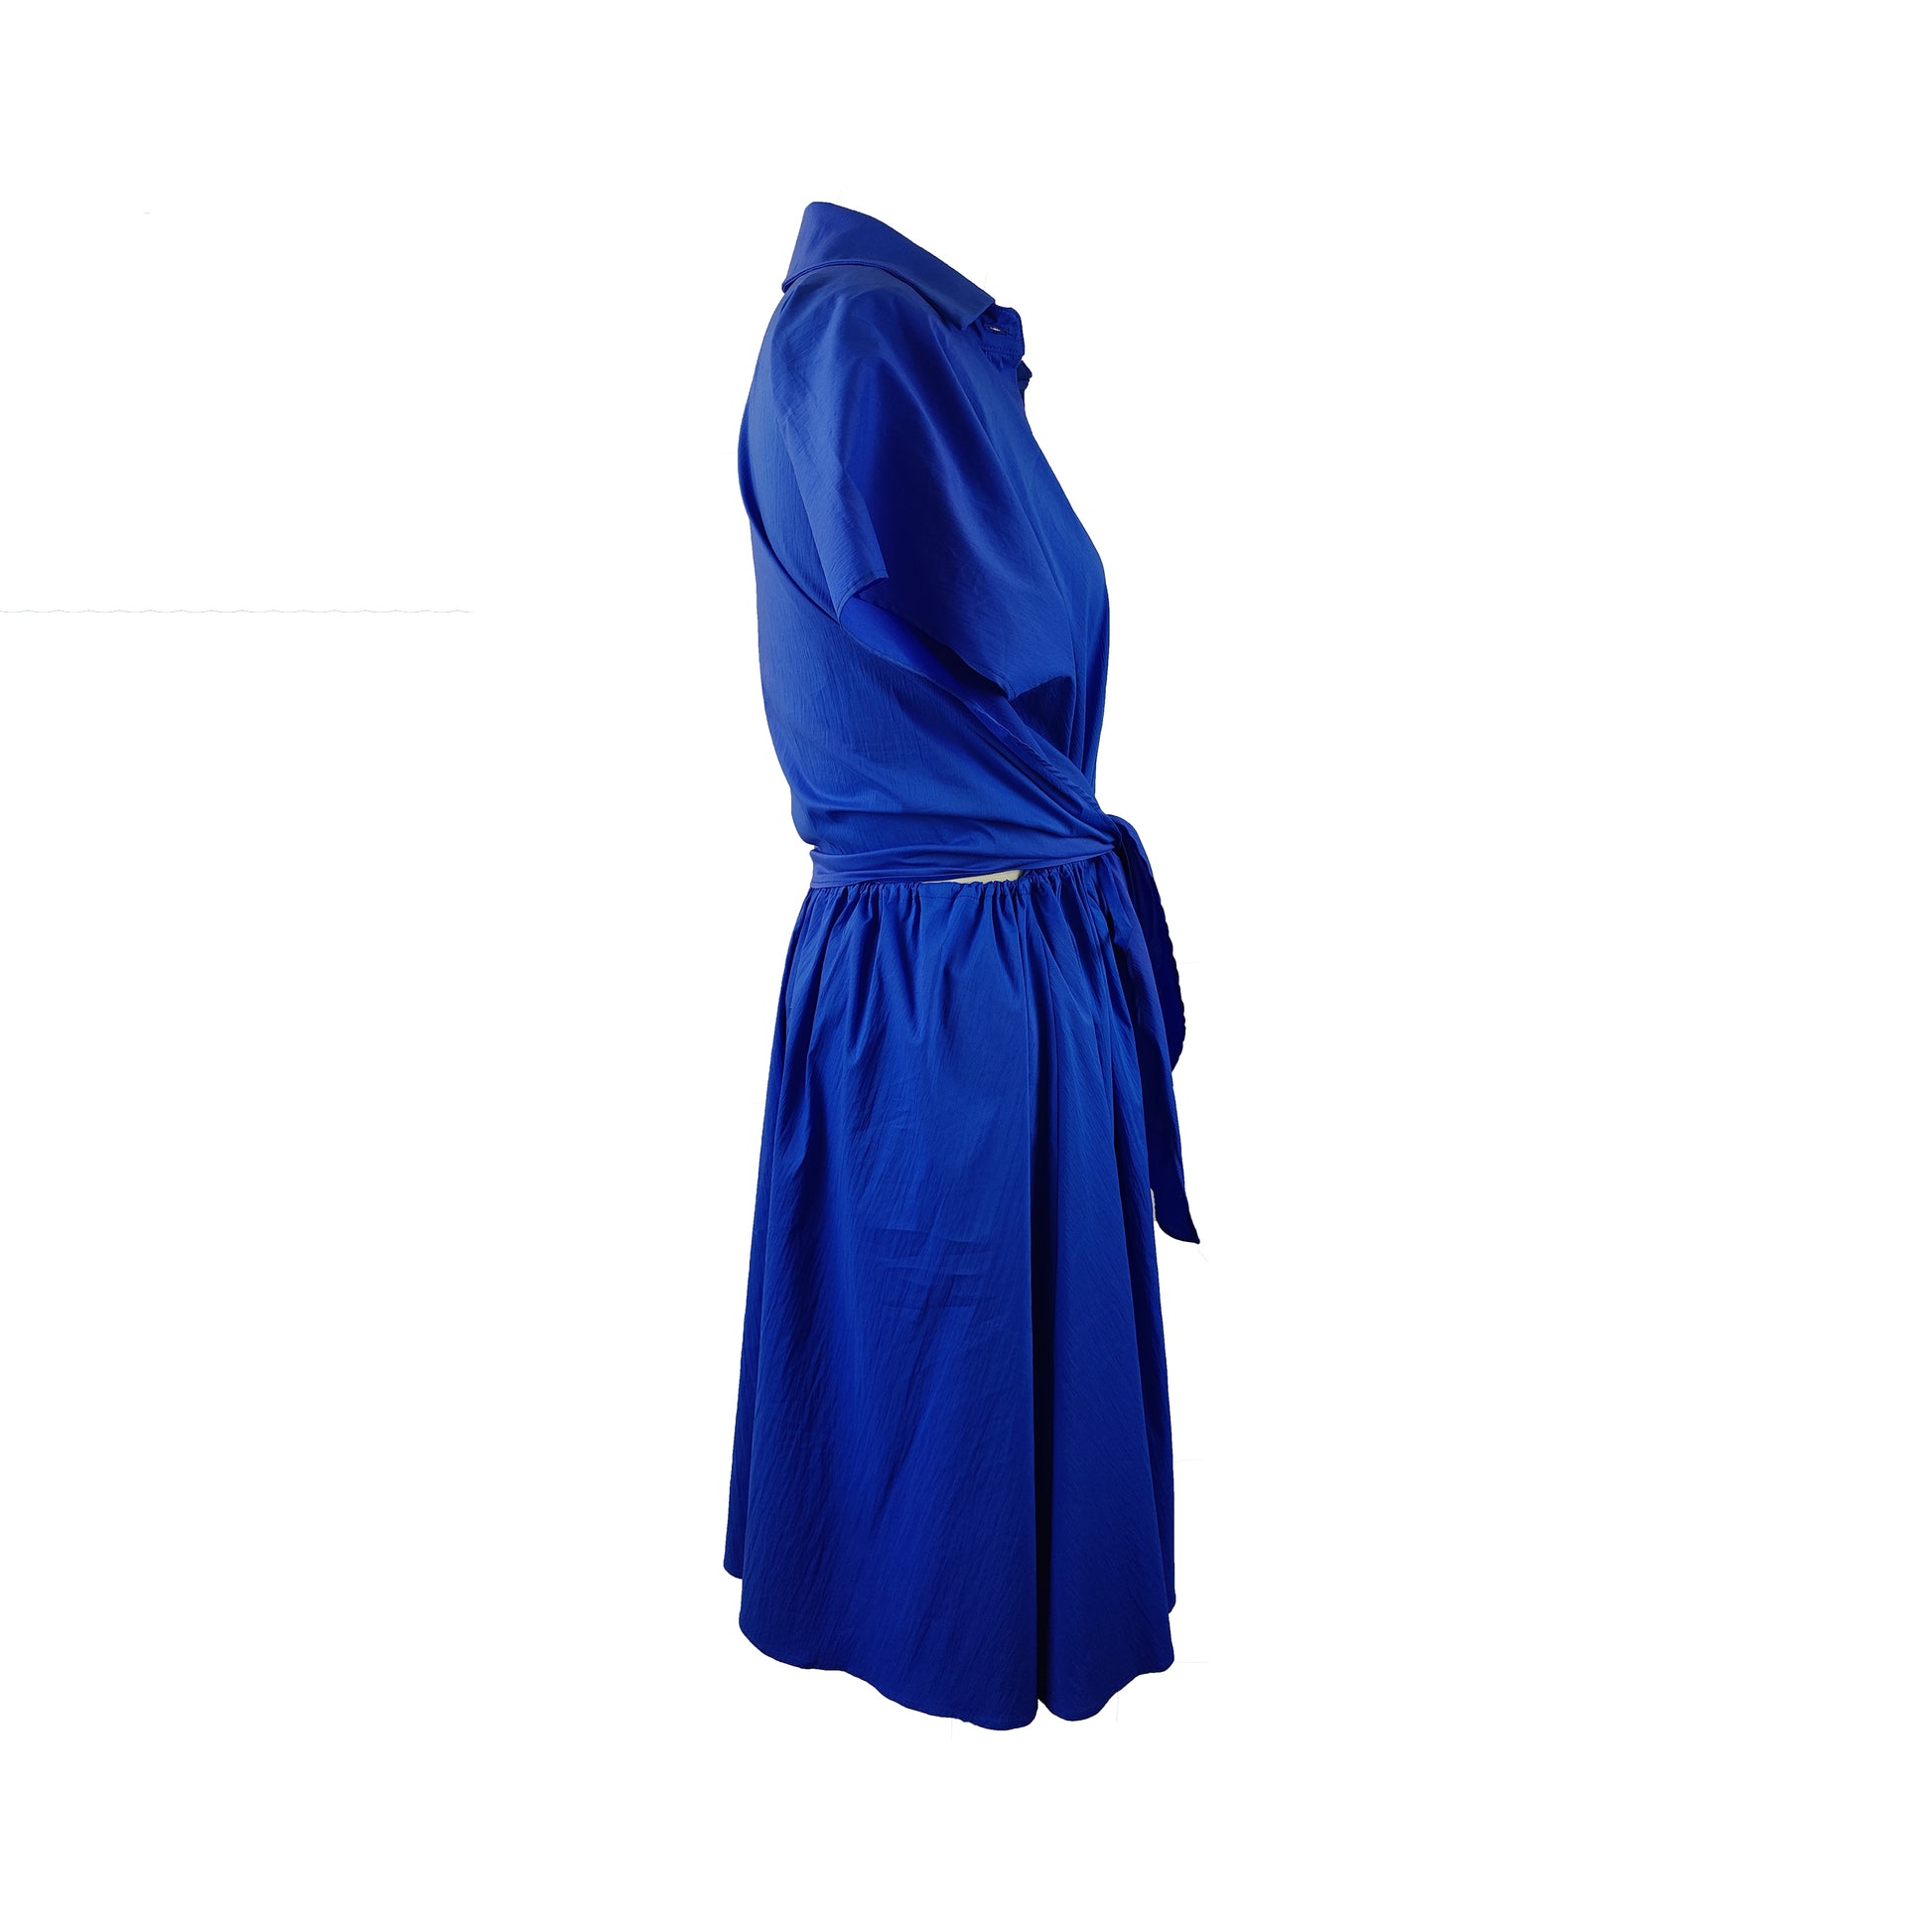 Side of cupro dress in cobalt blue with button detailing and adjustable waist styled as belt